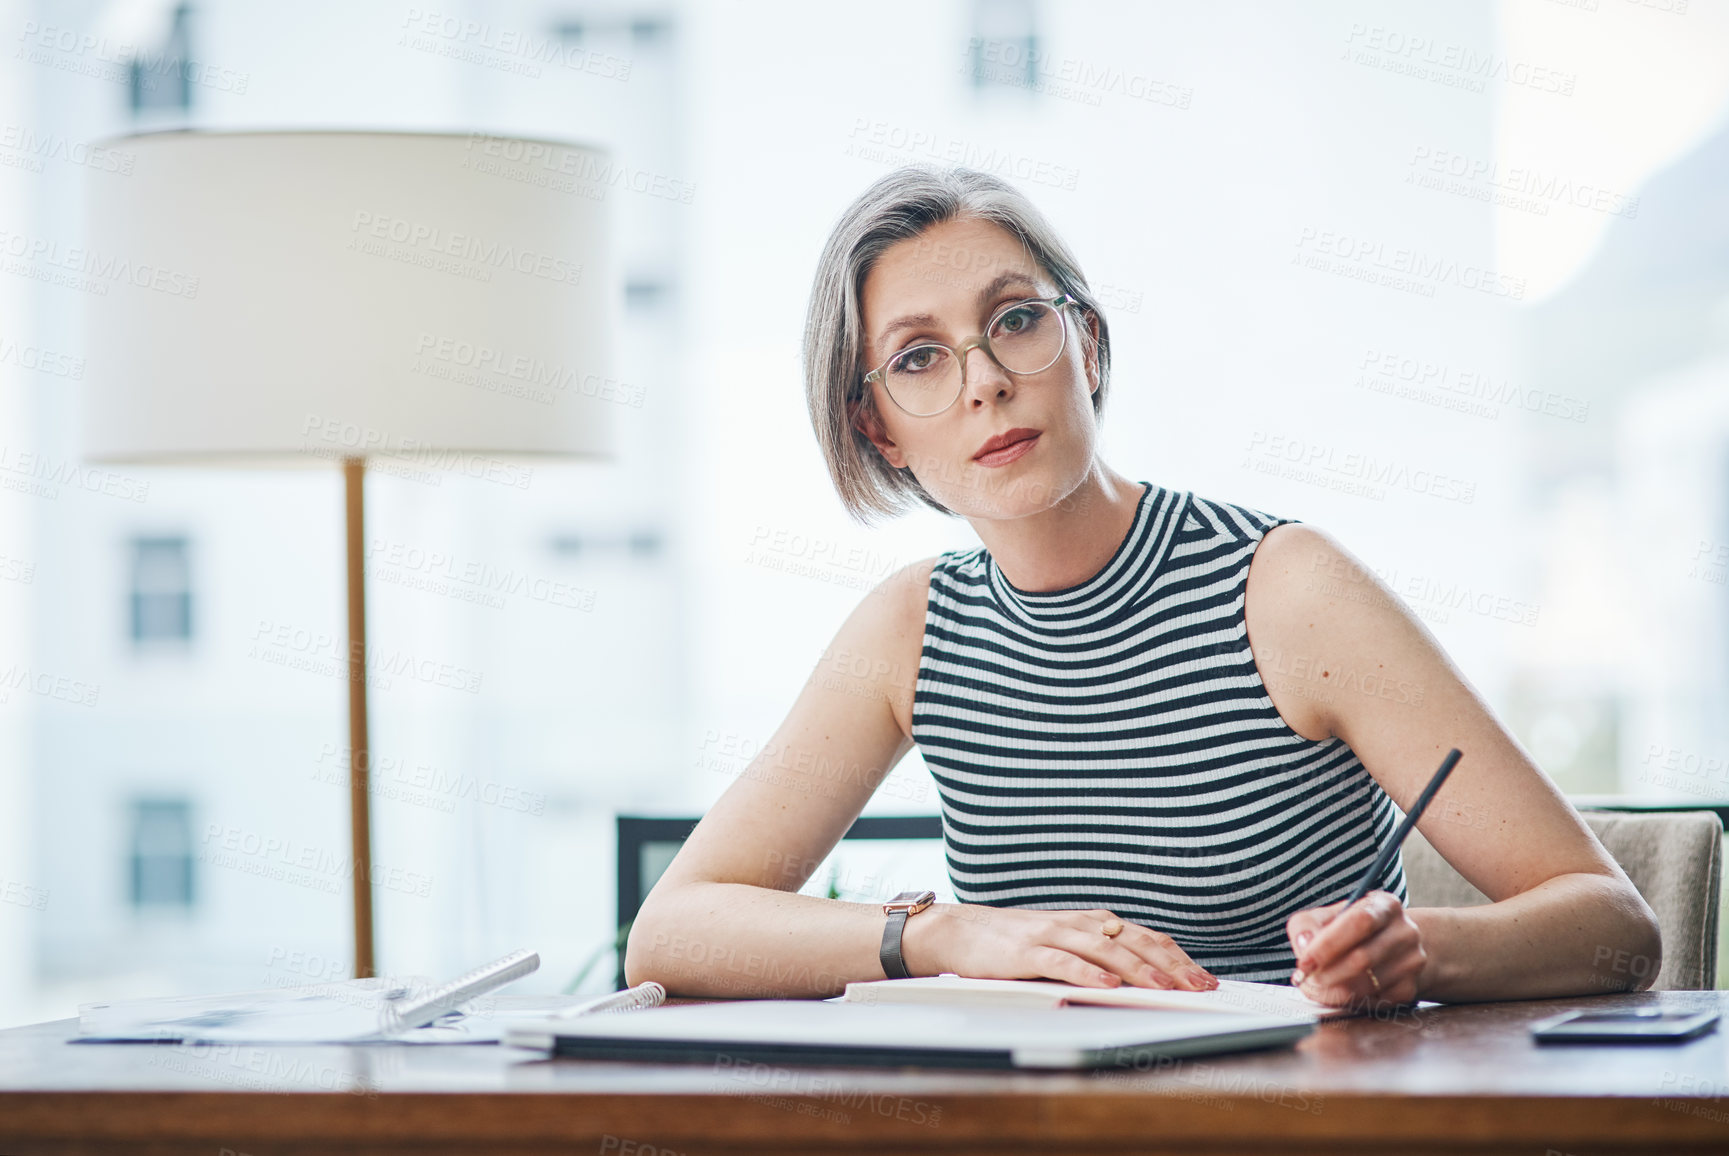 Buy stock photo Shot of of a mature businesswoman writing in her notebook